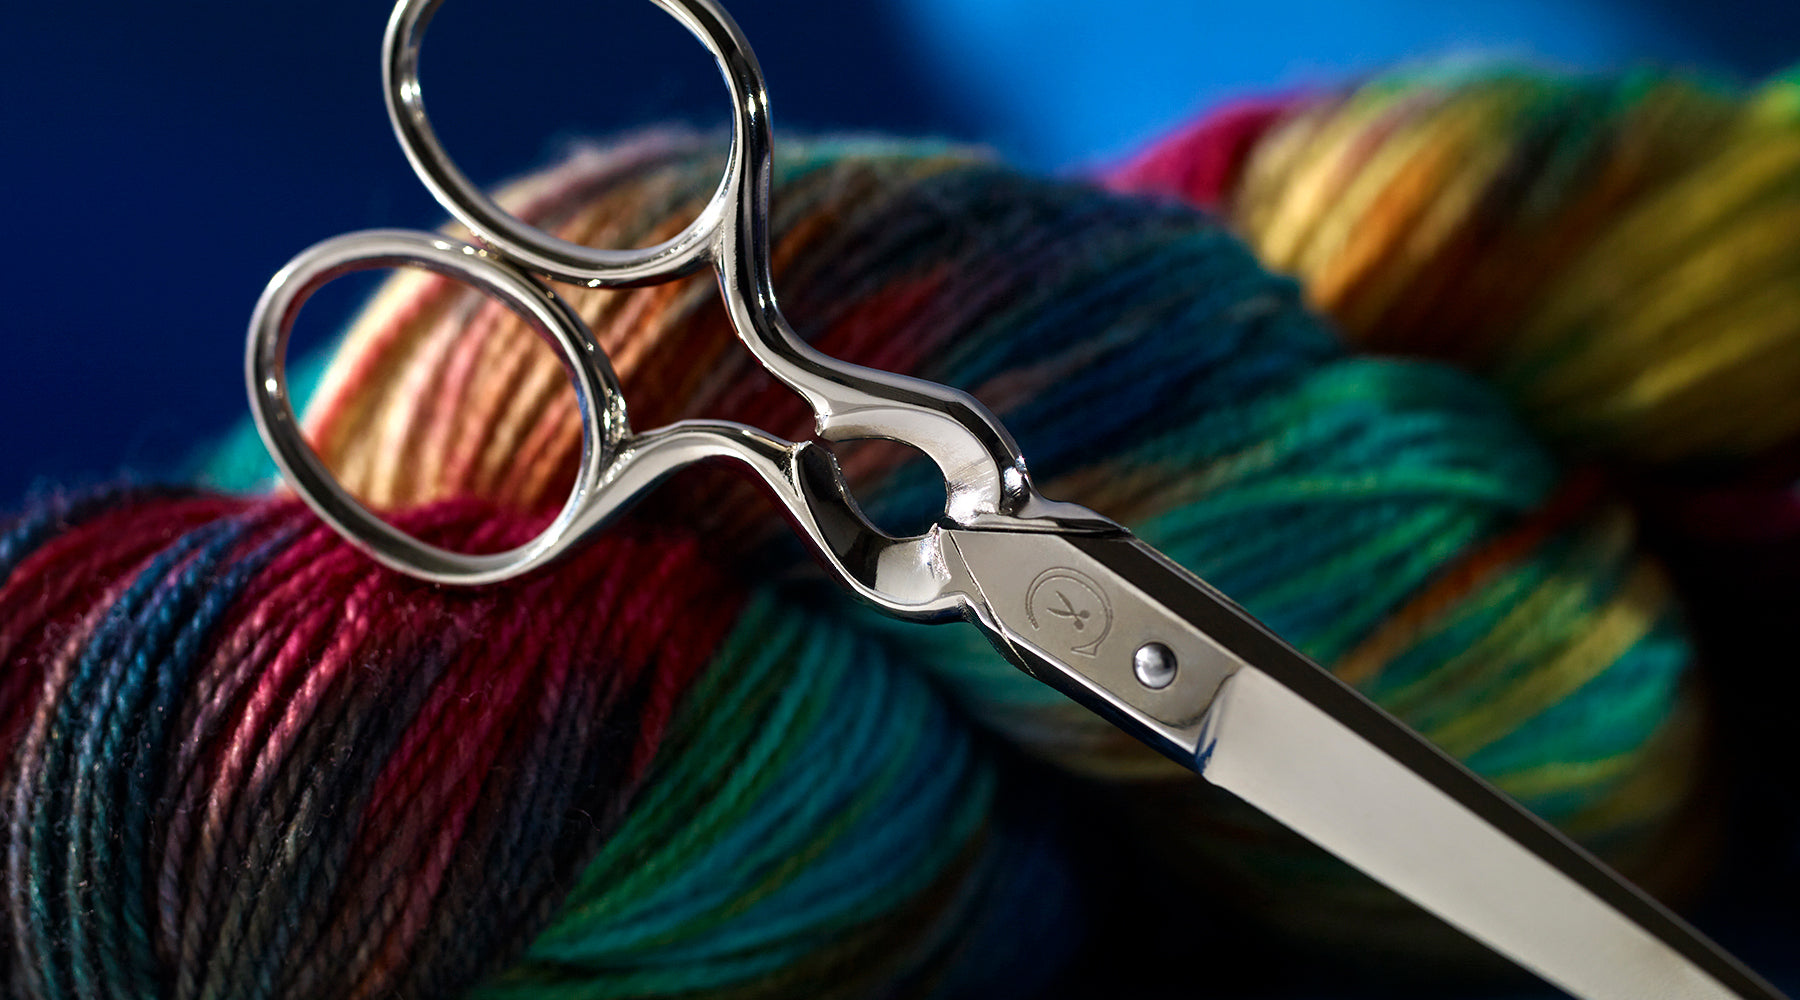 Using Fabric Scissors on Paper is a Crime - Ciselier Company